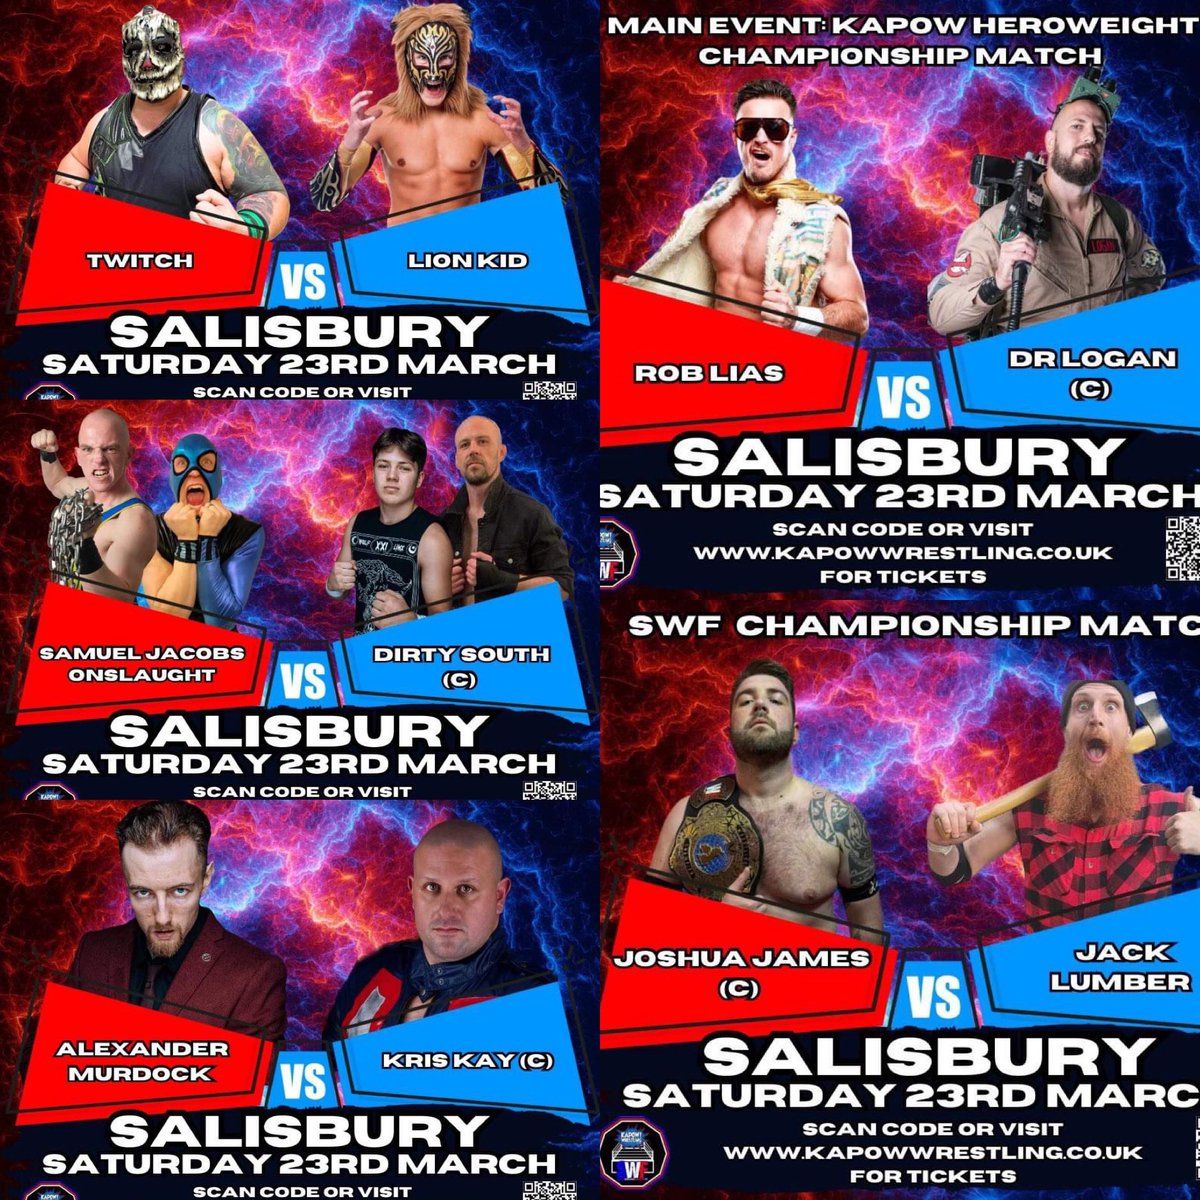 #tonight in #salisbury #wiltshire we have an action packed night of wrestling! 4 #championship matches!! Tickets including kids for £1 at ticketsource.co.uk/kapow-wrestling